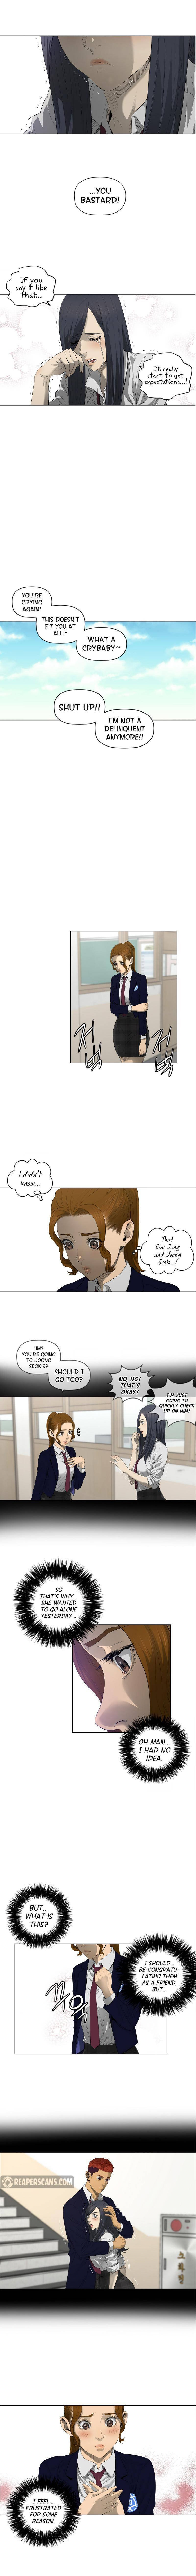 second-life-of-a-gangster-chap-33-3